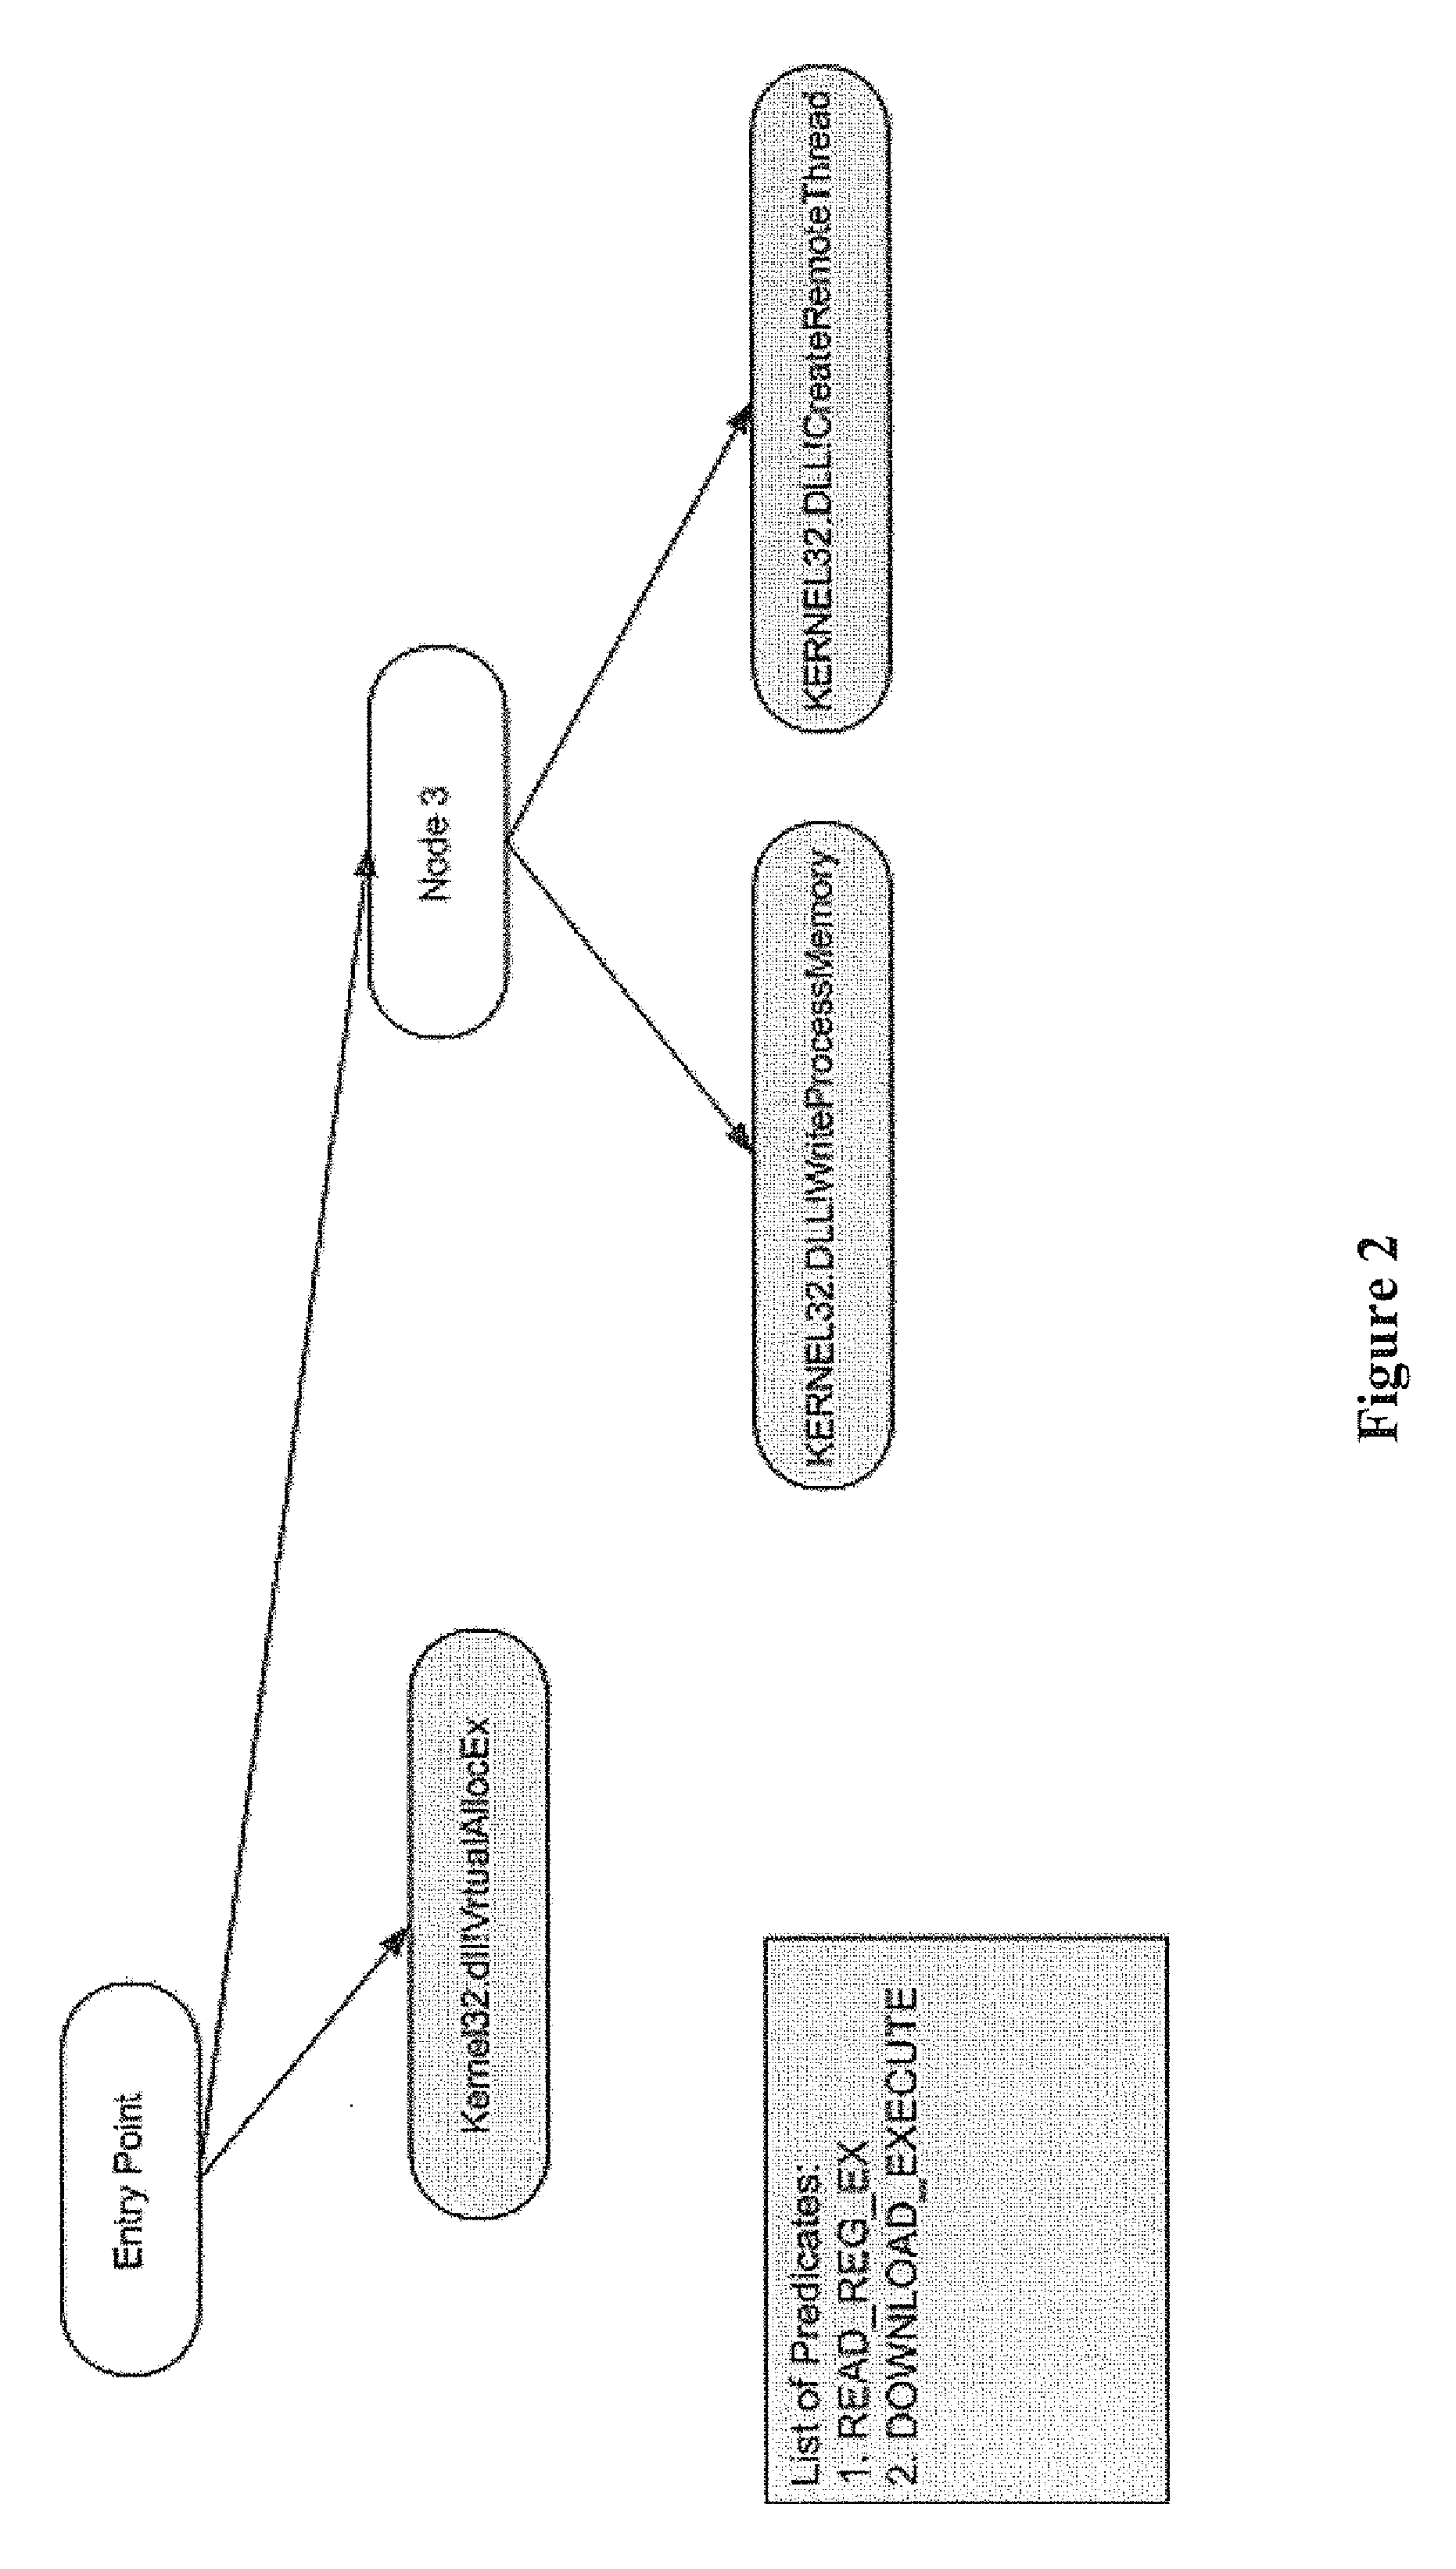 Methods for detecting malicious programs using a multilayered heuristics approach